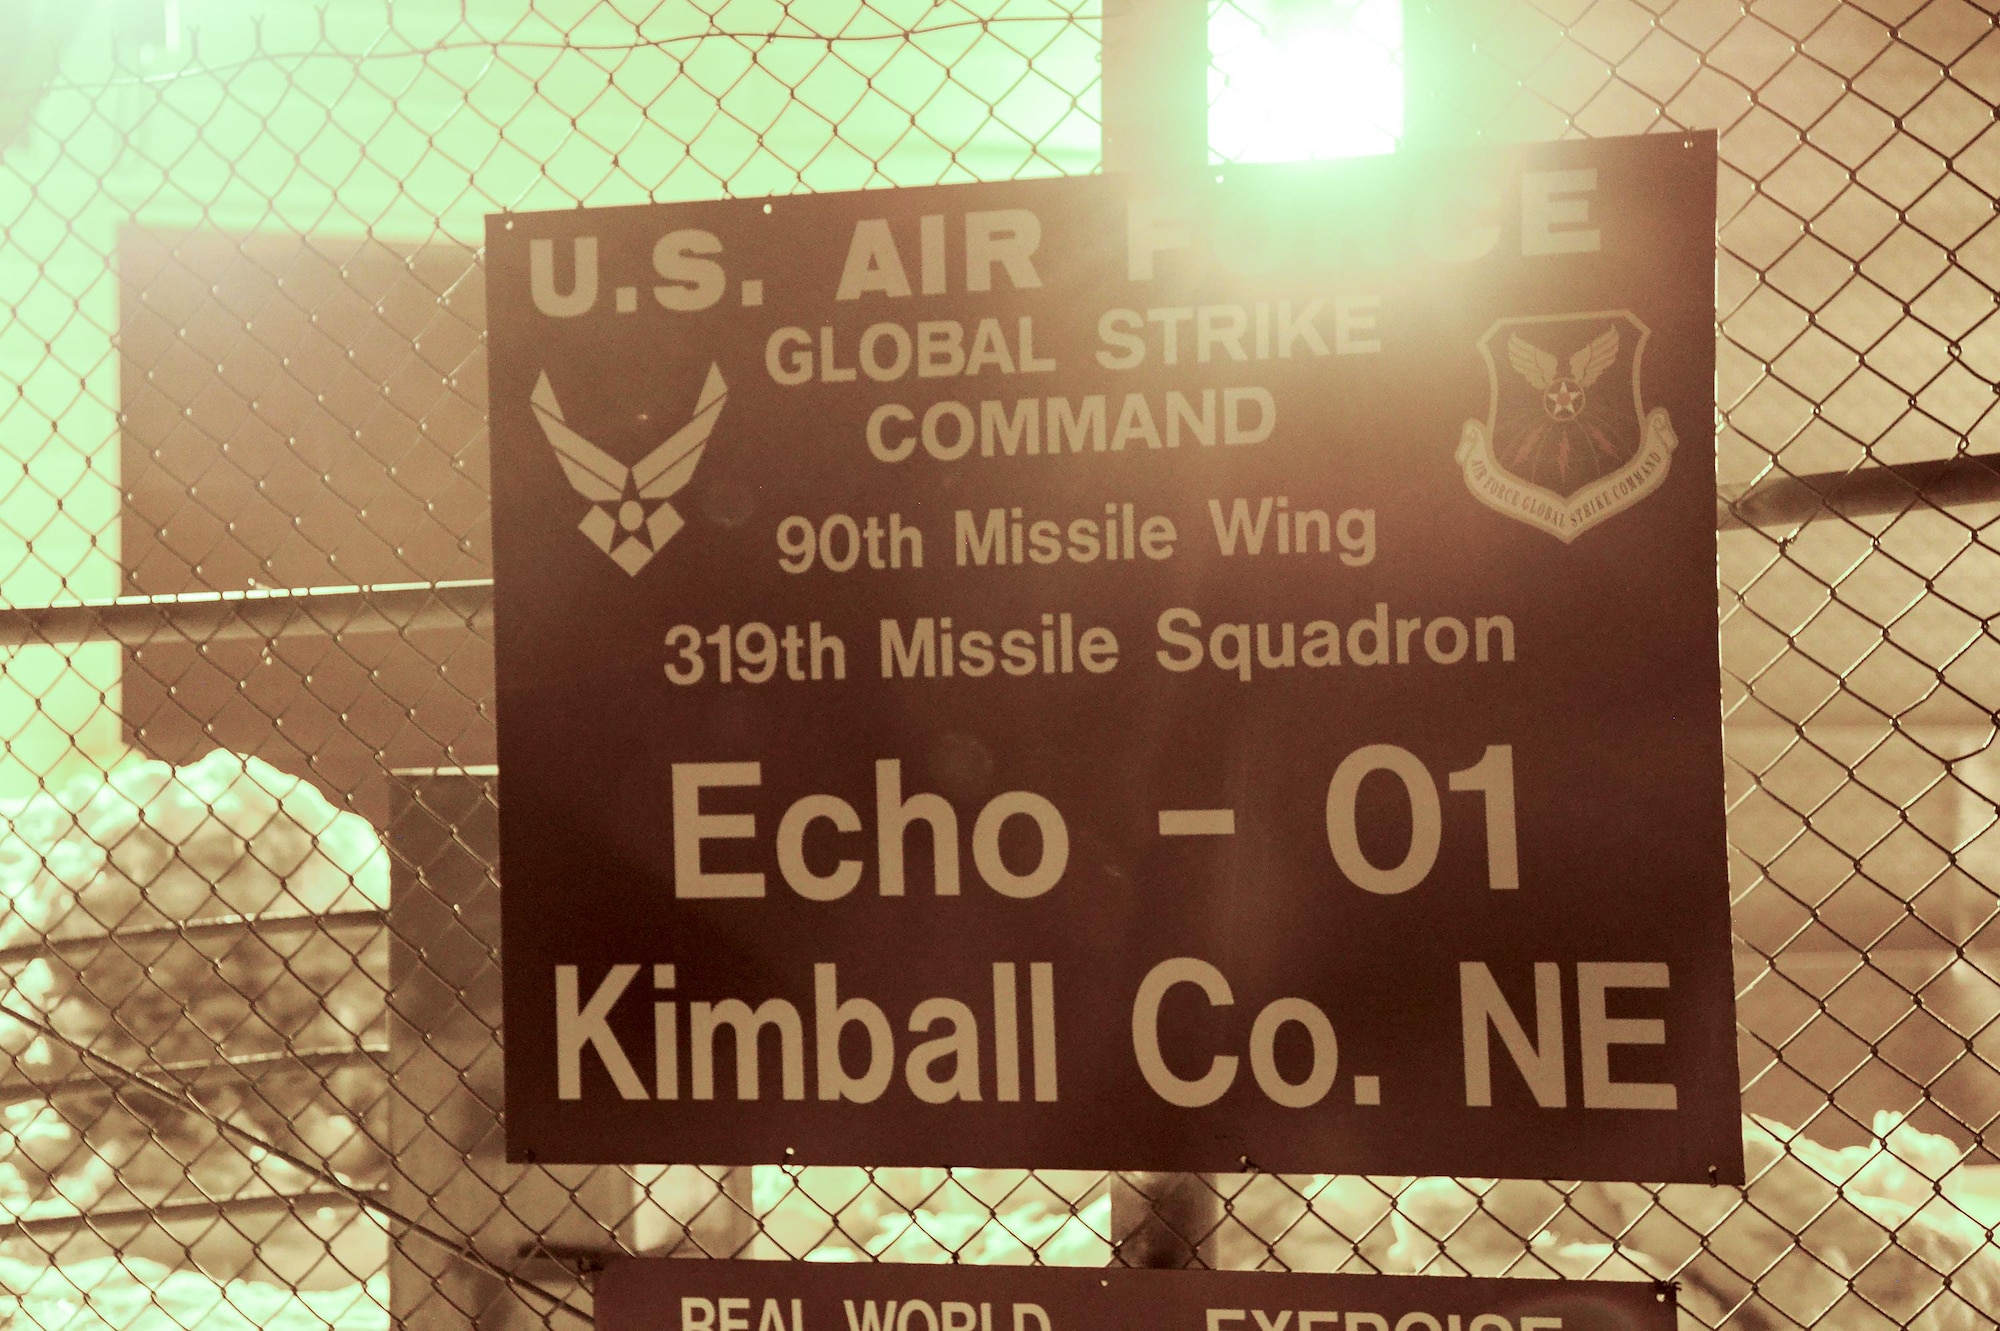 A sign hangs on the perimeter fence of a Missile Alert Facility in the F.E. Warren Air Force Base, Wyo., missile complex. MAFs house underground launch control centers in which missileers man the Minuteman III Weapon System, while topside security forces Airmen, facility managers, chefs and occasionally maintenance personnel stay to perform their critical mission roles. (U.S. Air Force photo by Senior Airman Jason Wiese)